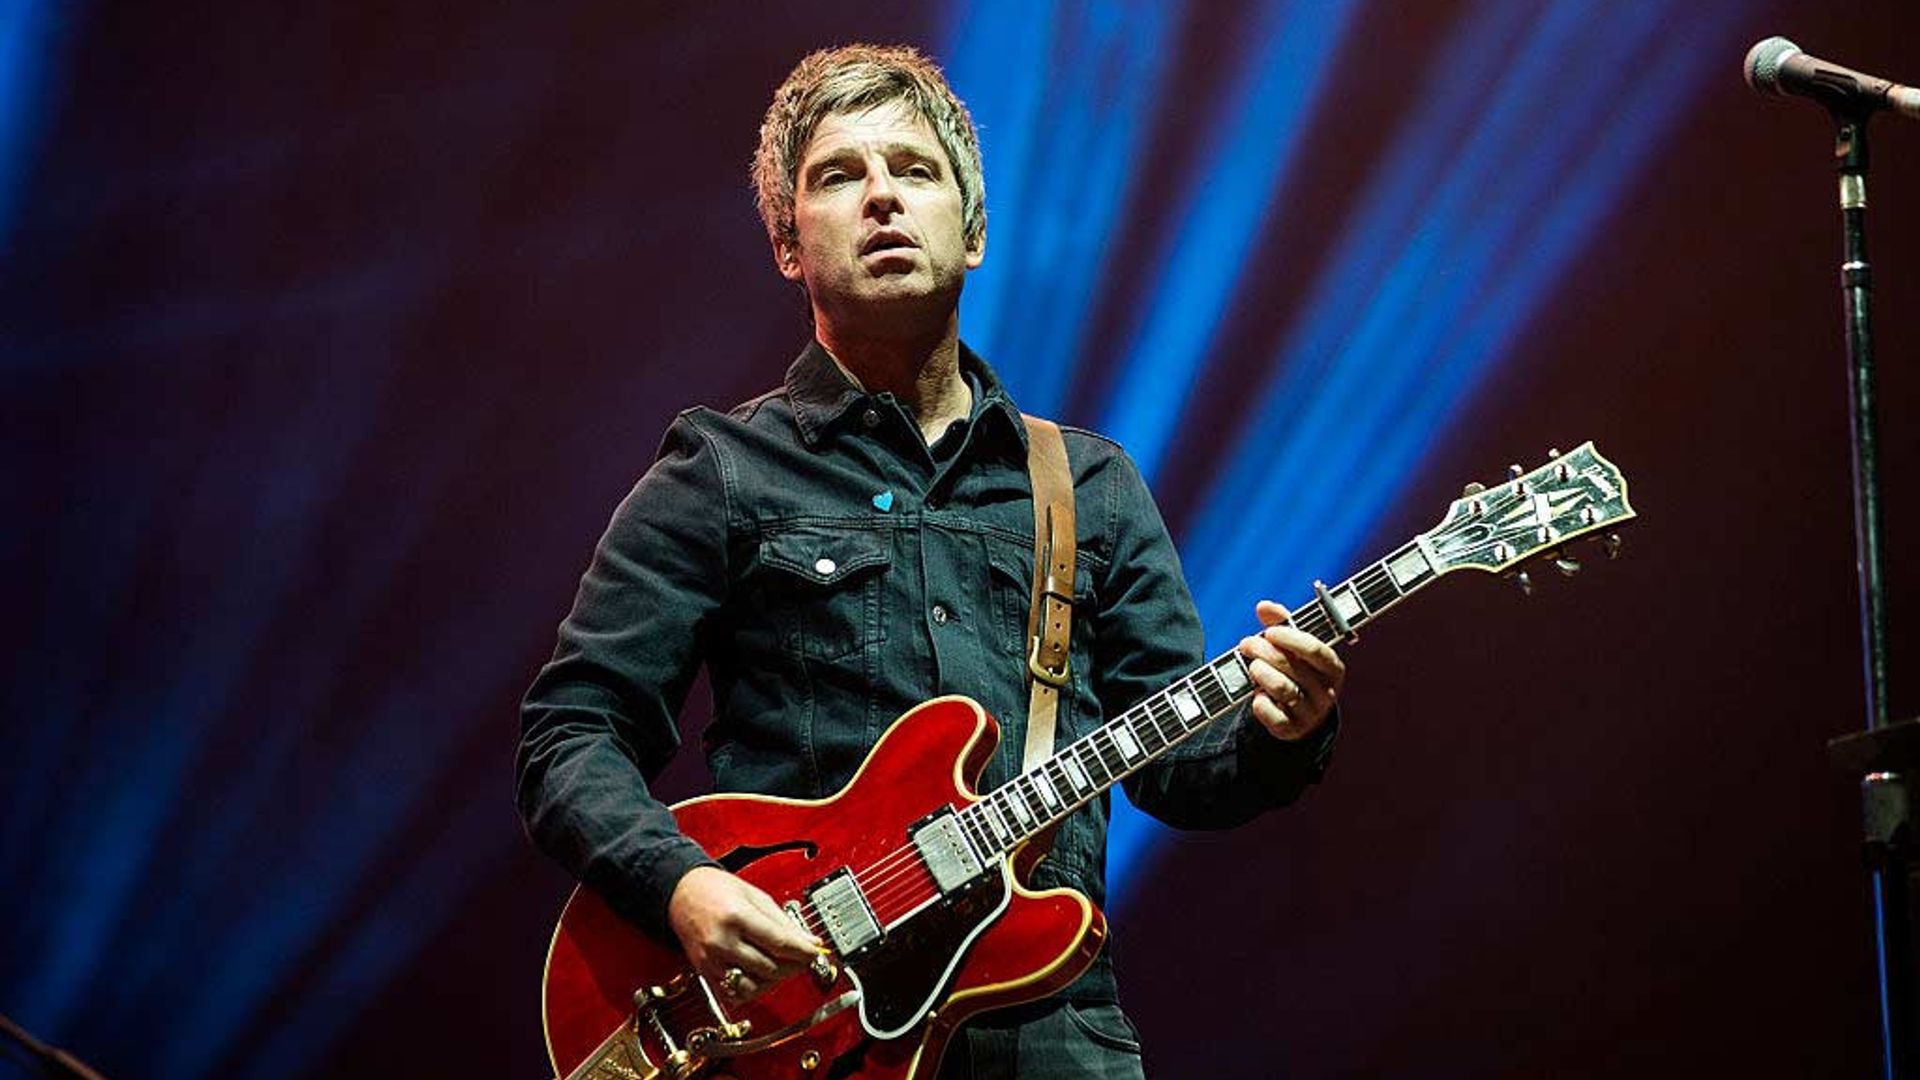 Noel Gallagher performing on stage. 